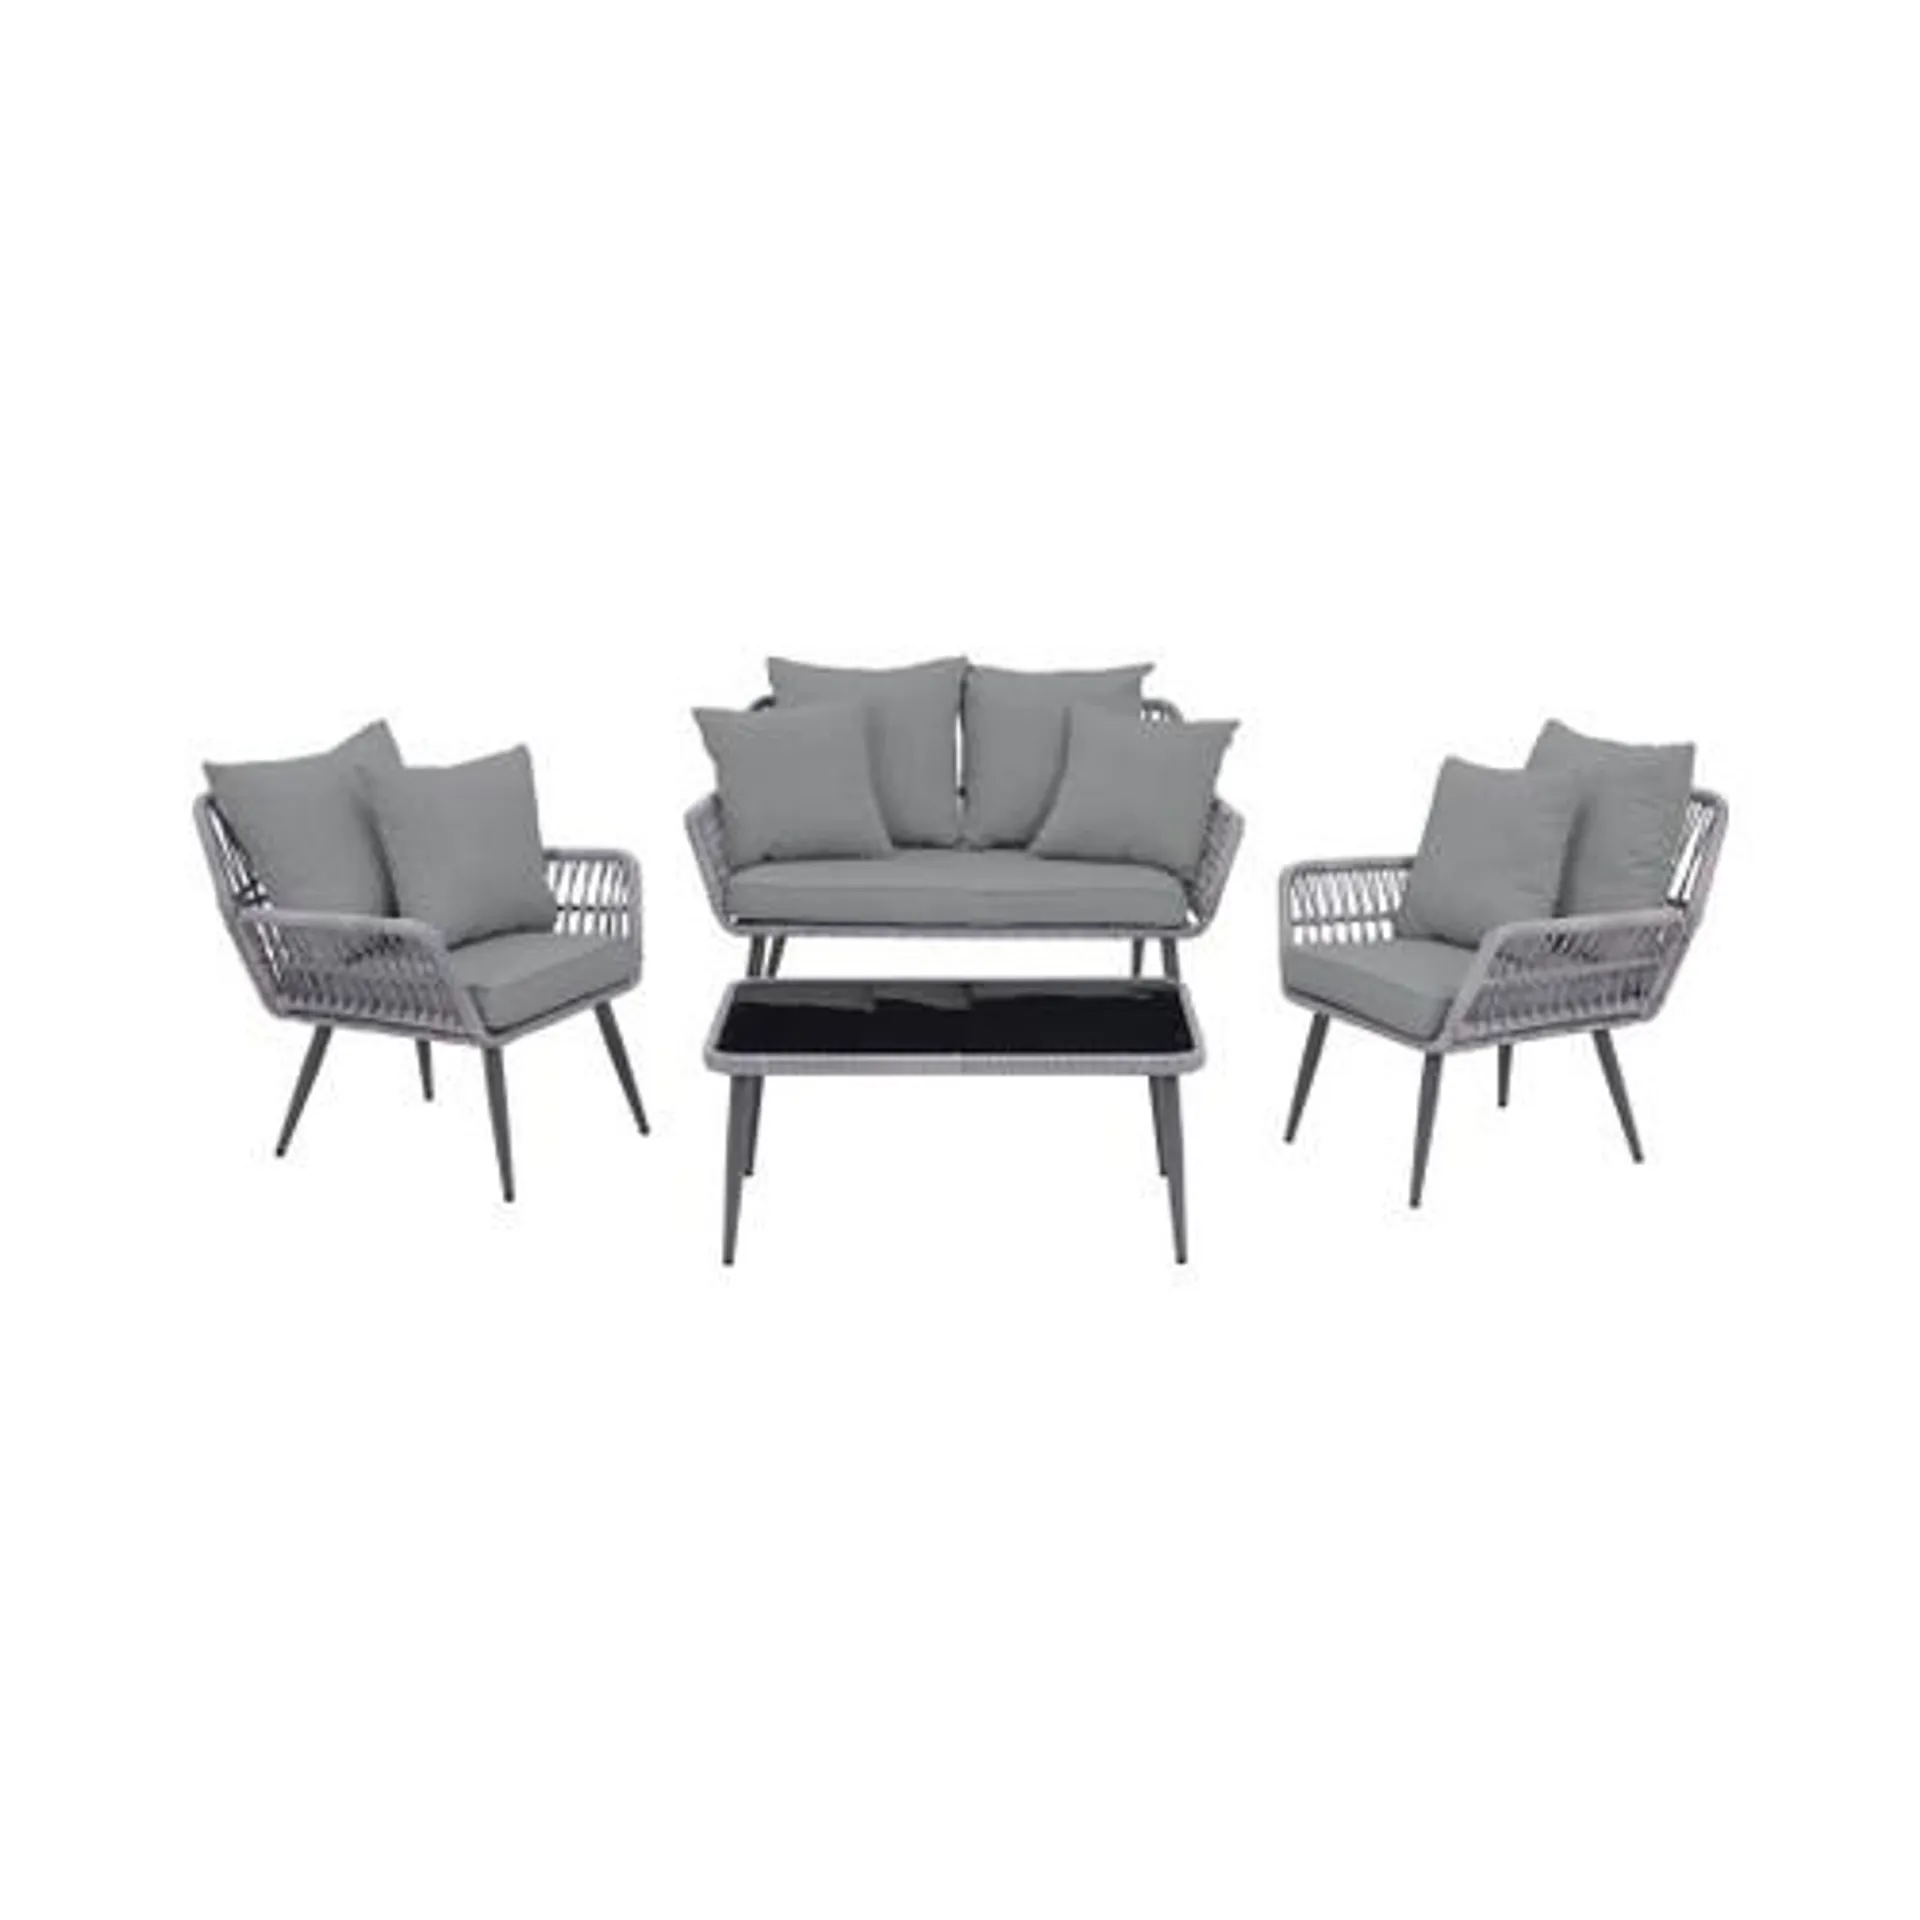 Portofino Patio 4-Person Conversation Set with Coffee Table with Gray Cushions